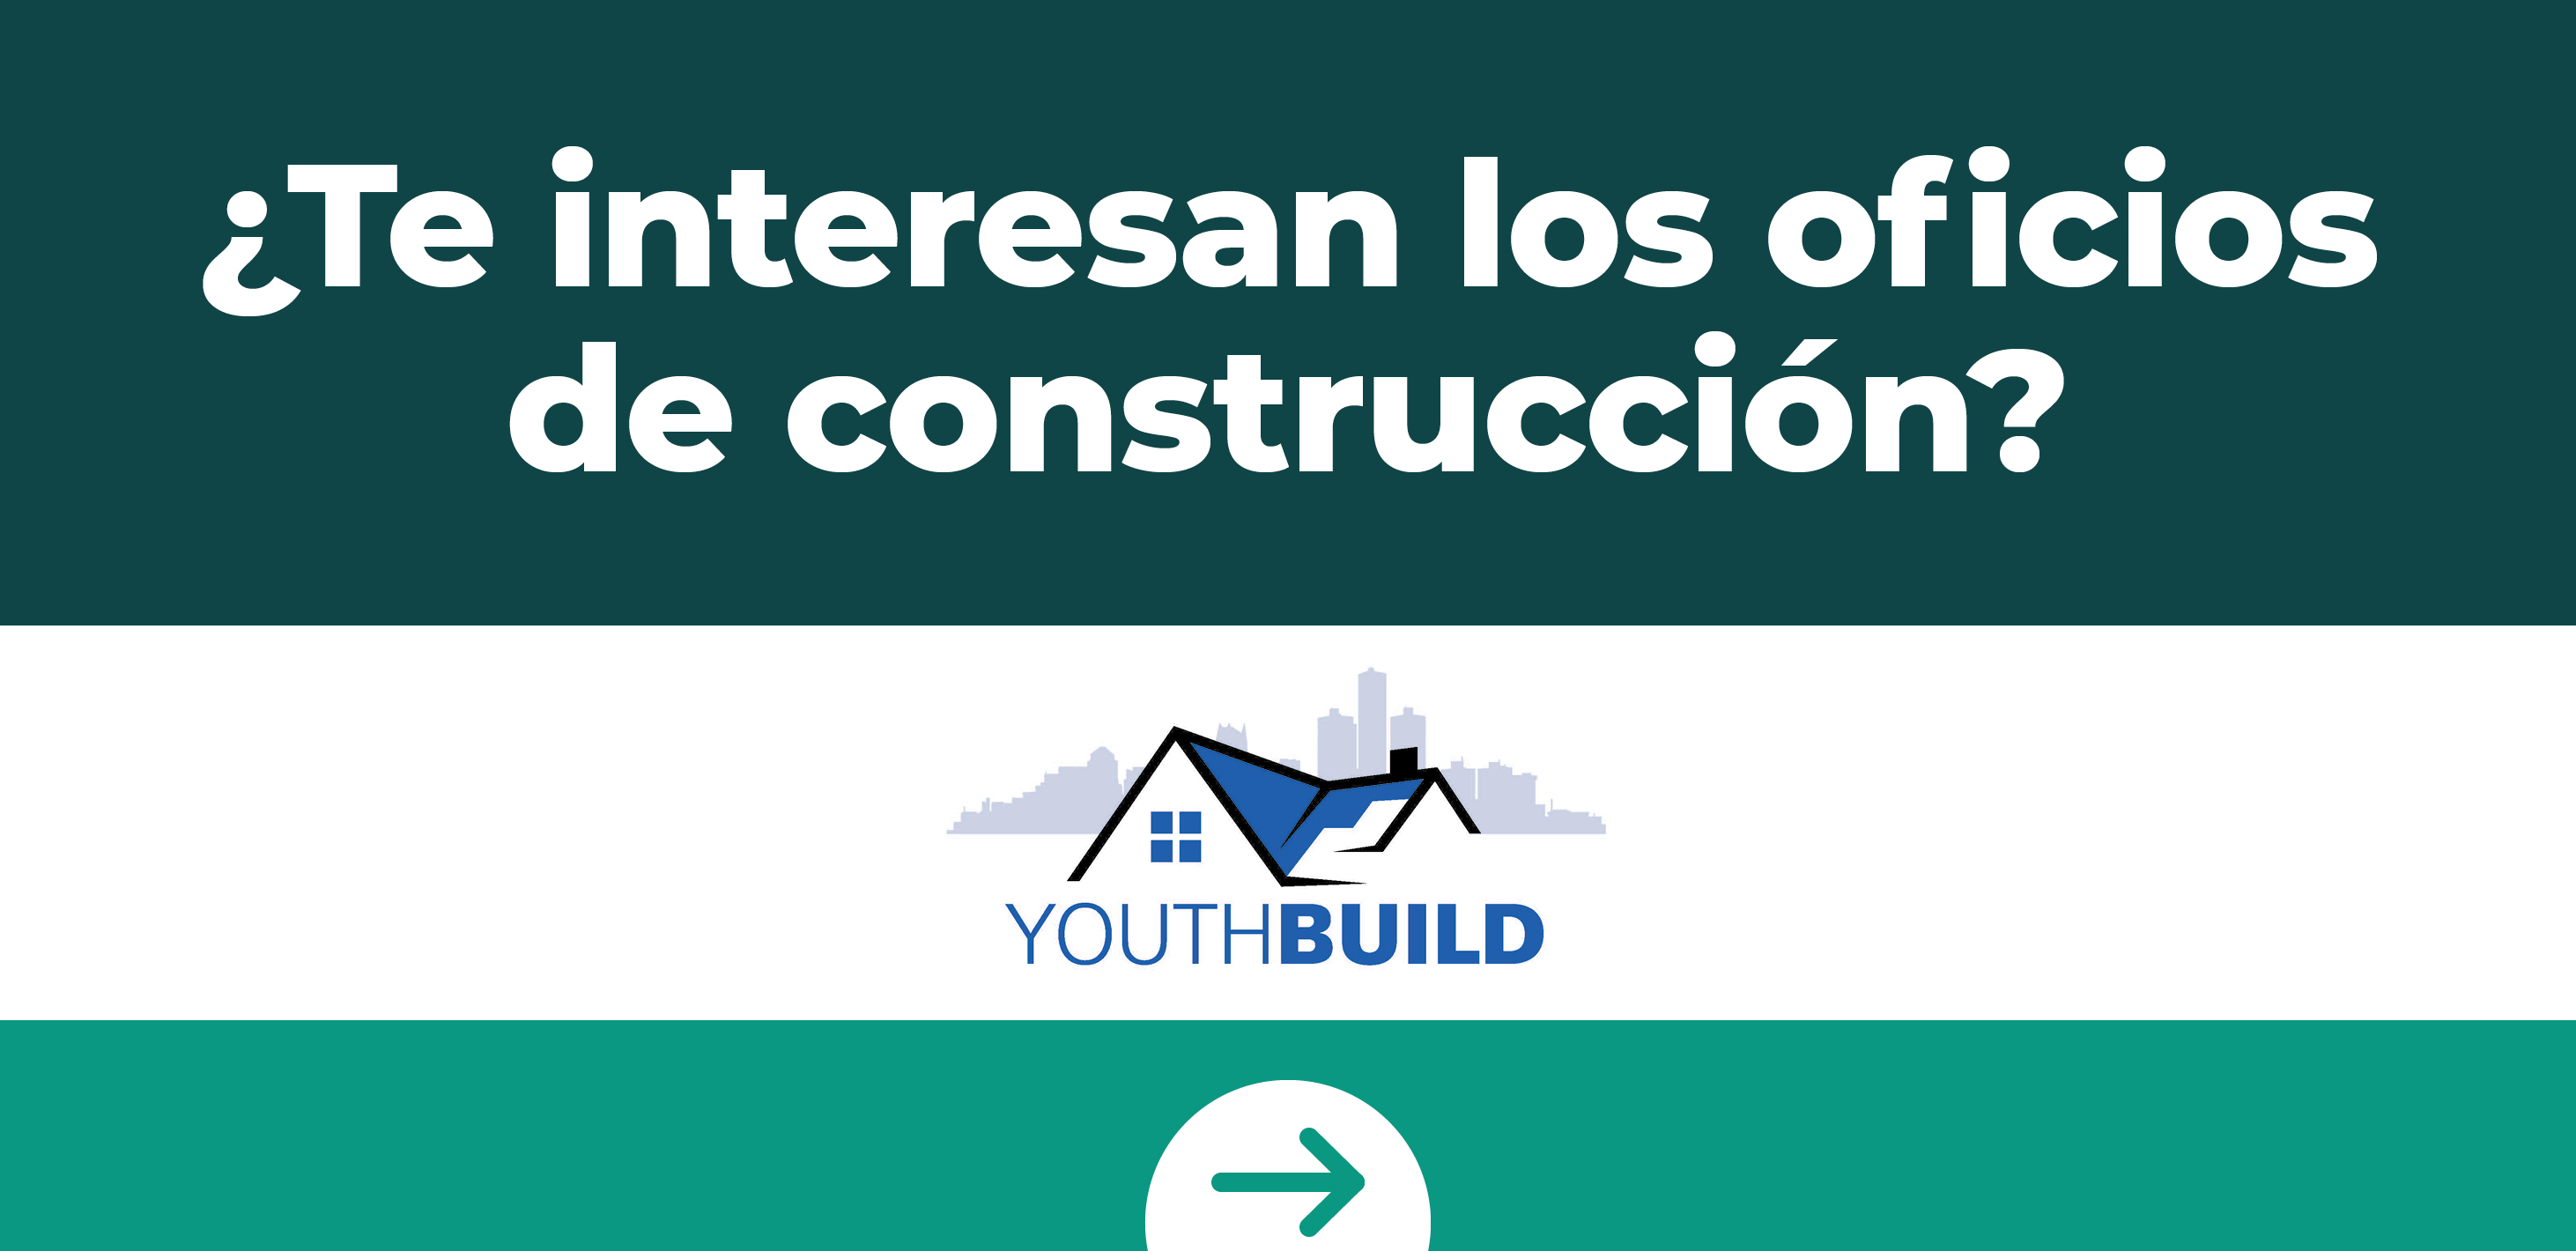 Youth Build